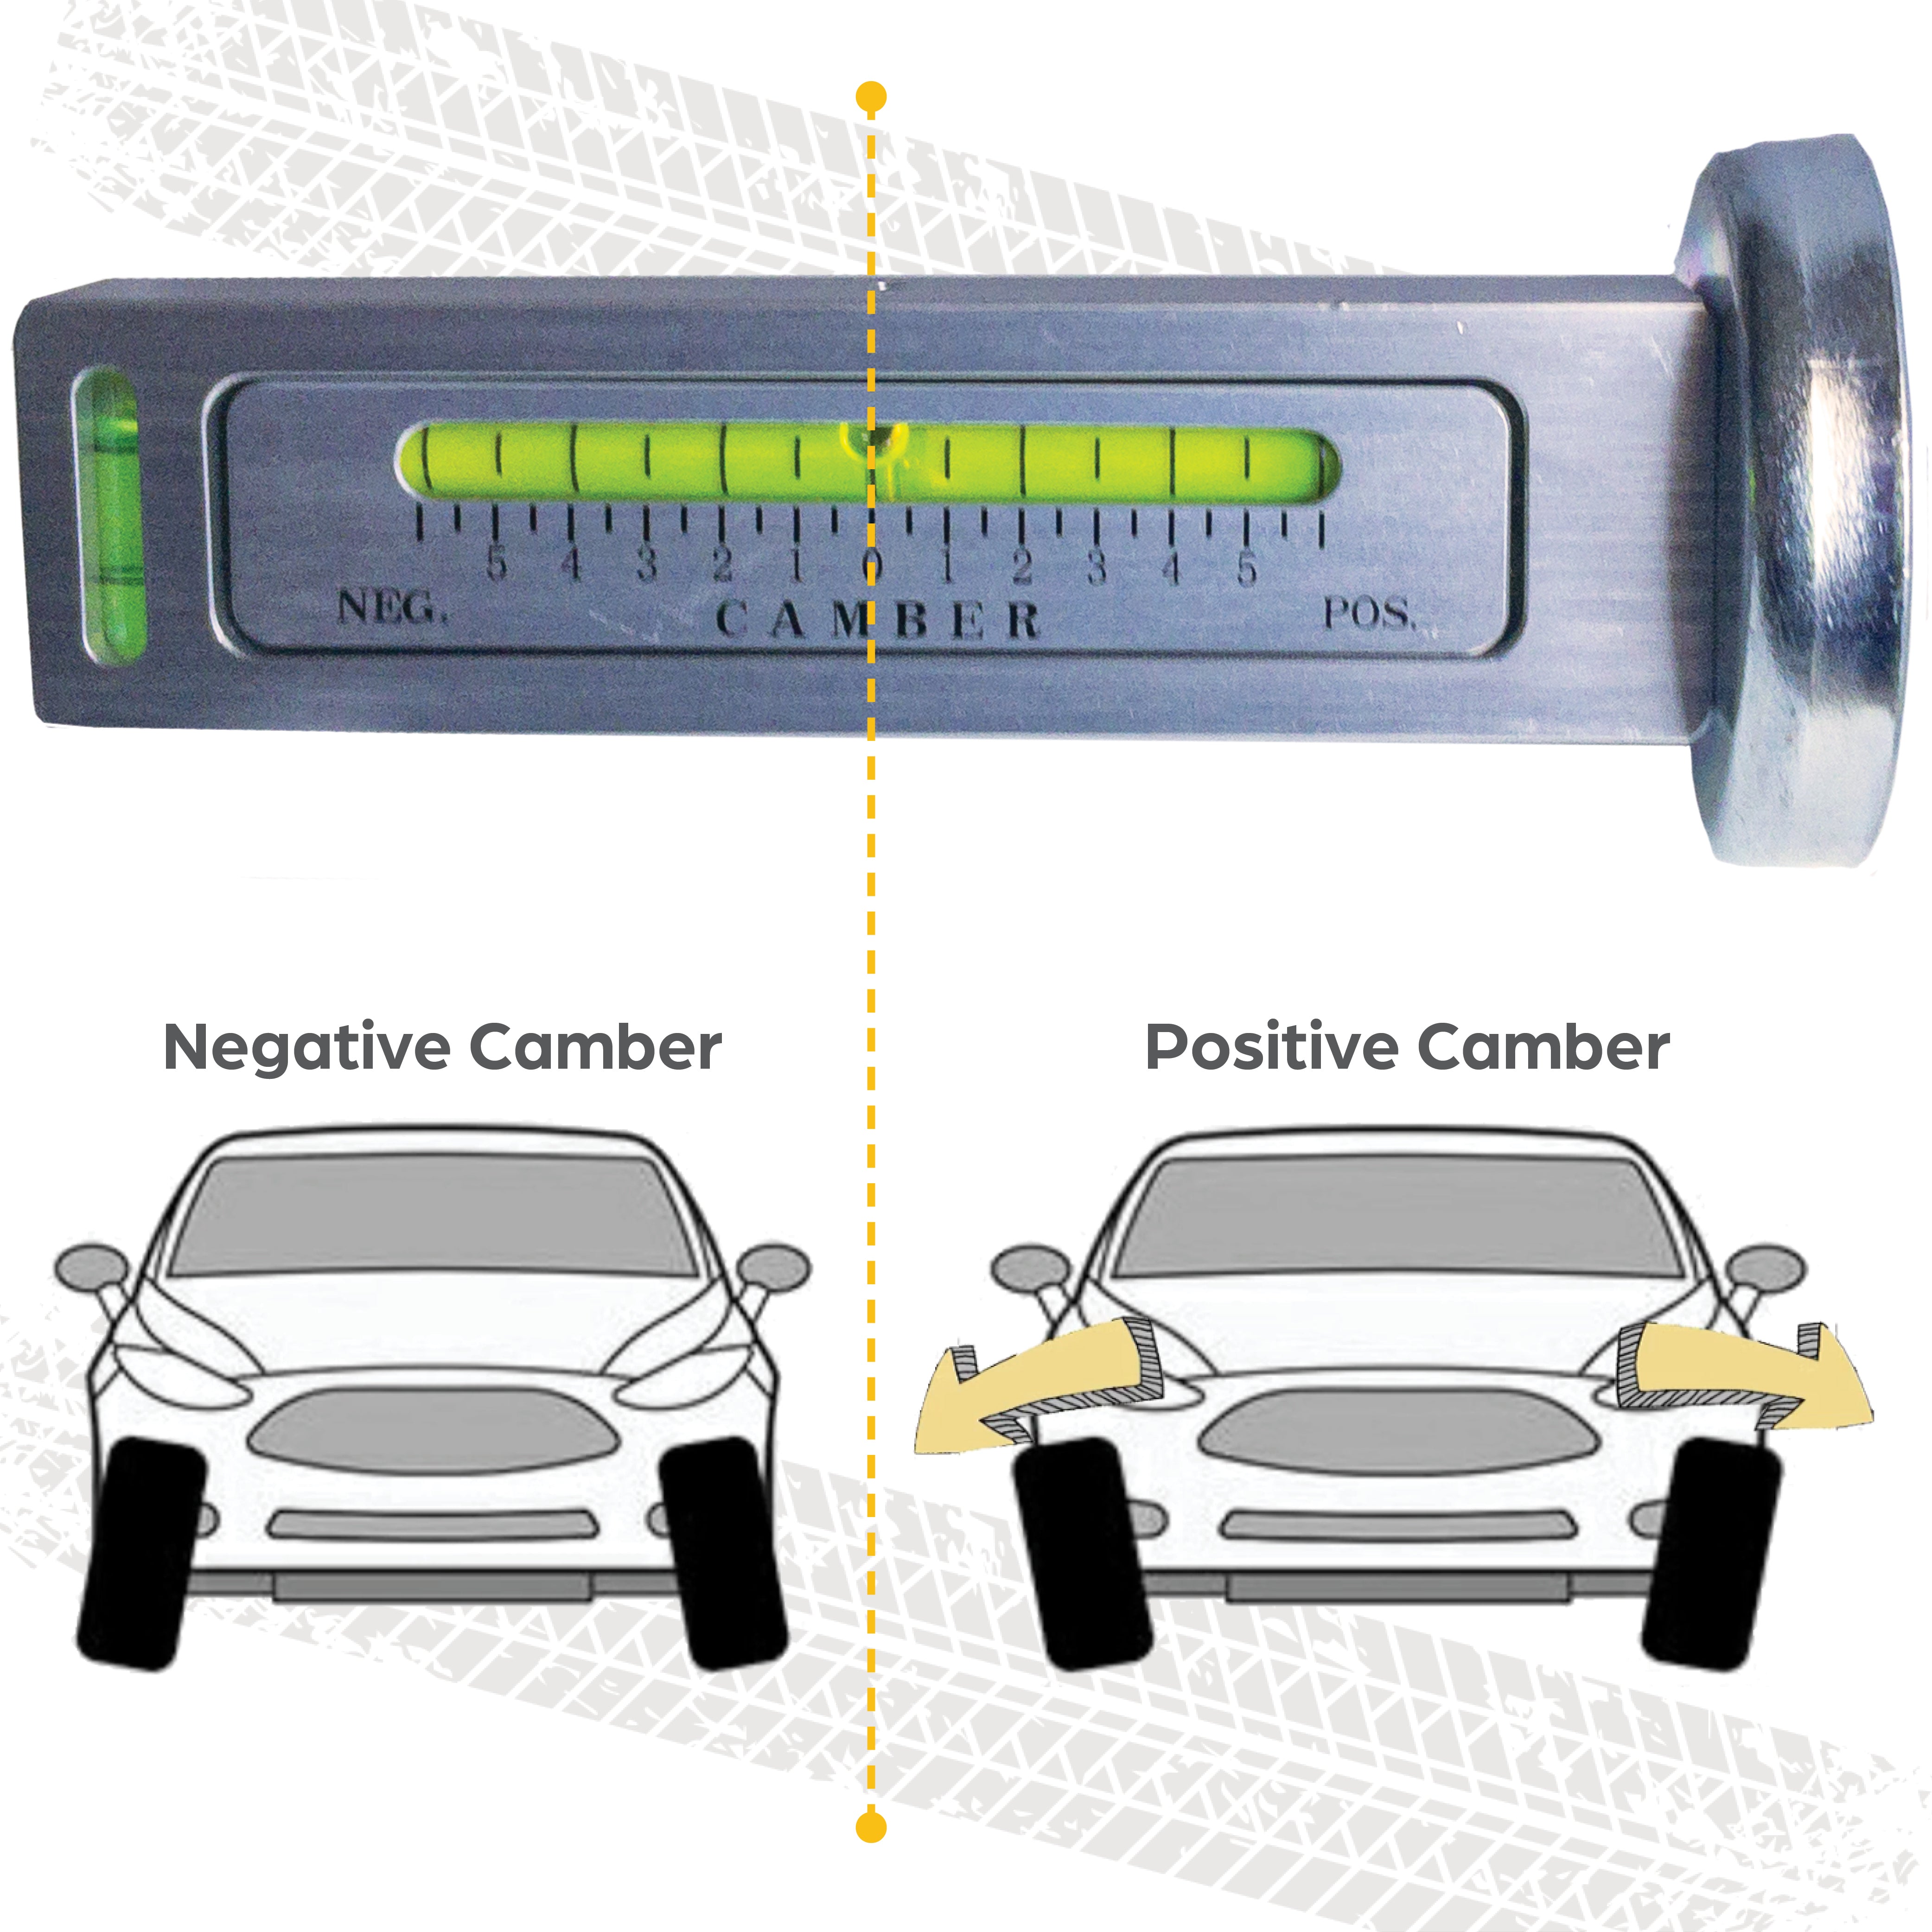 Magnetic Camber Alignment Gauge